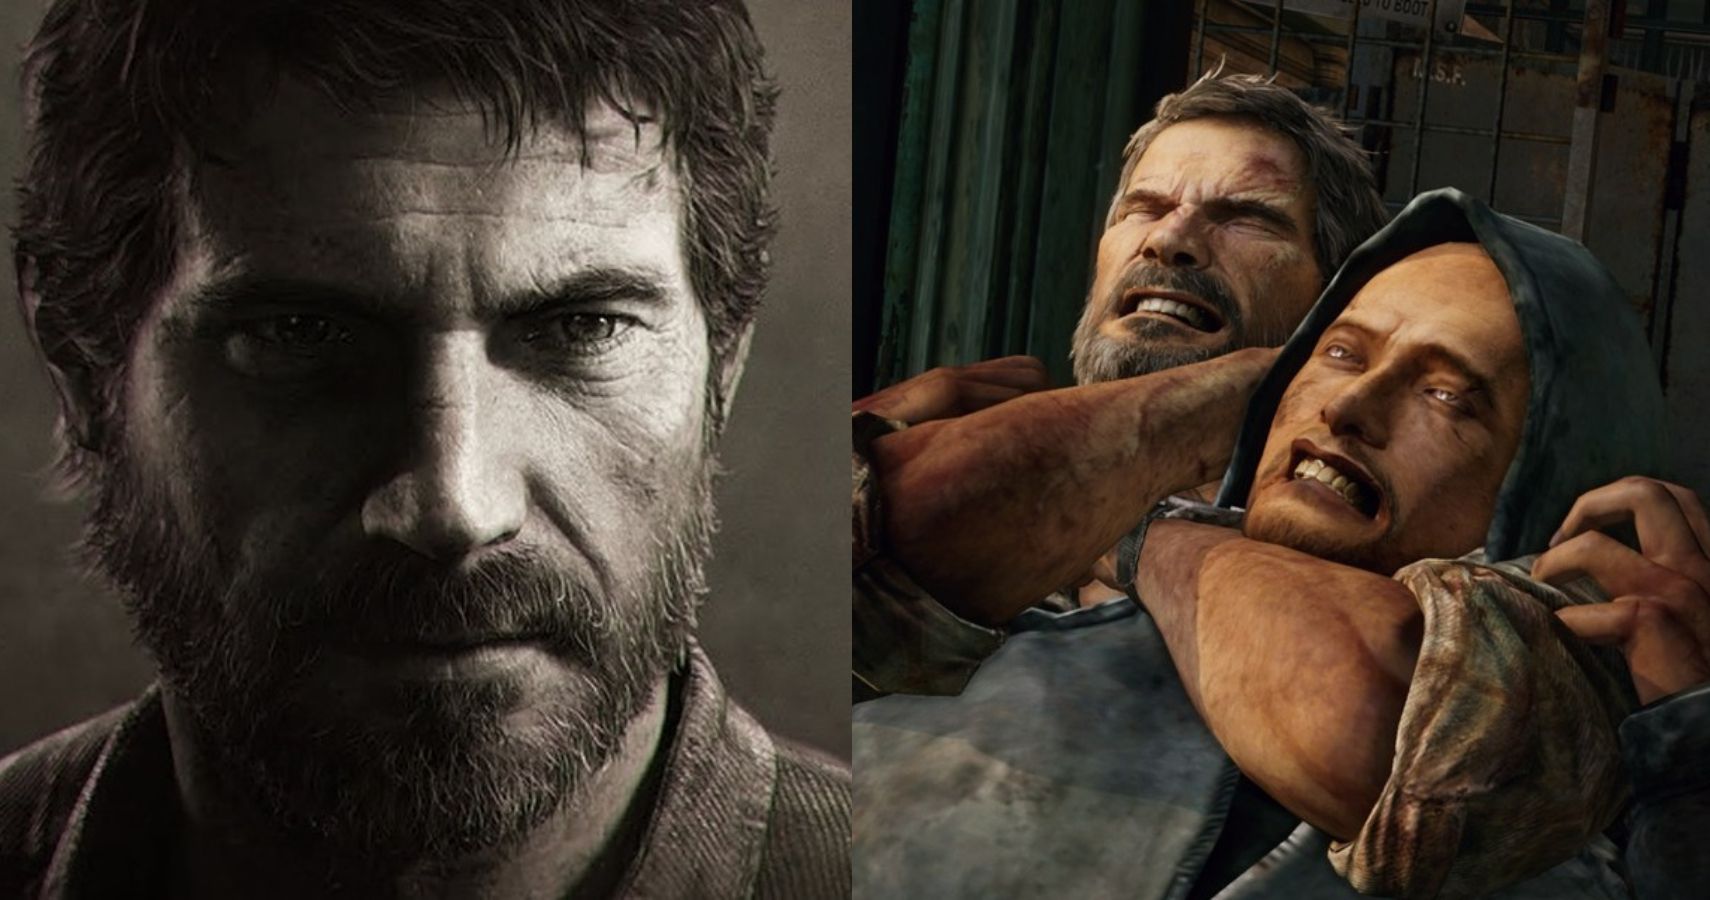 Is Joel Really The Villain In The Last Of Us?